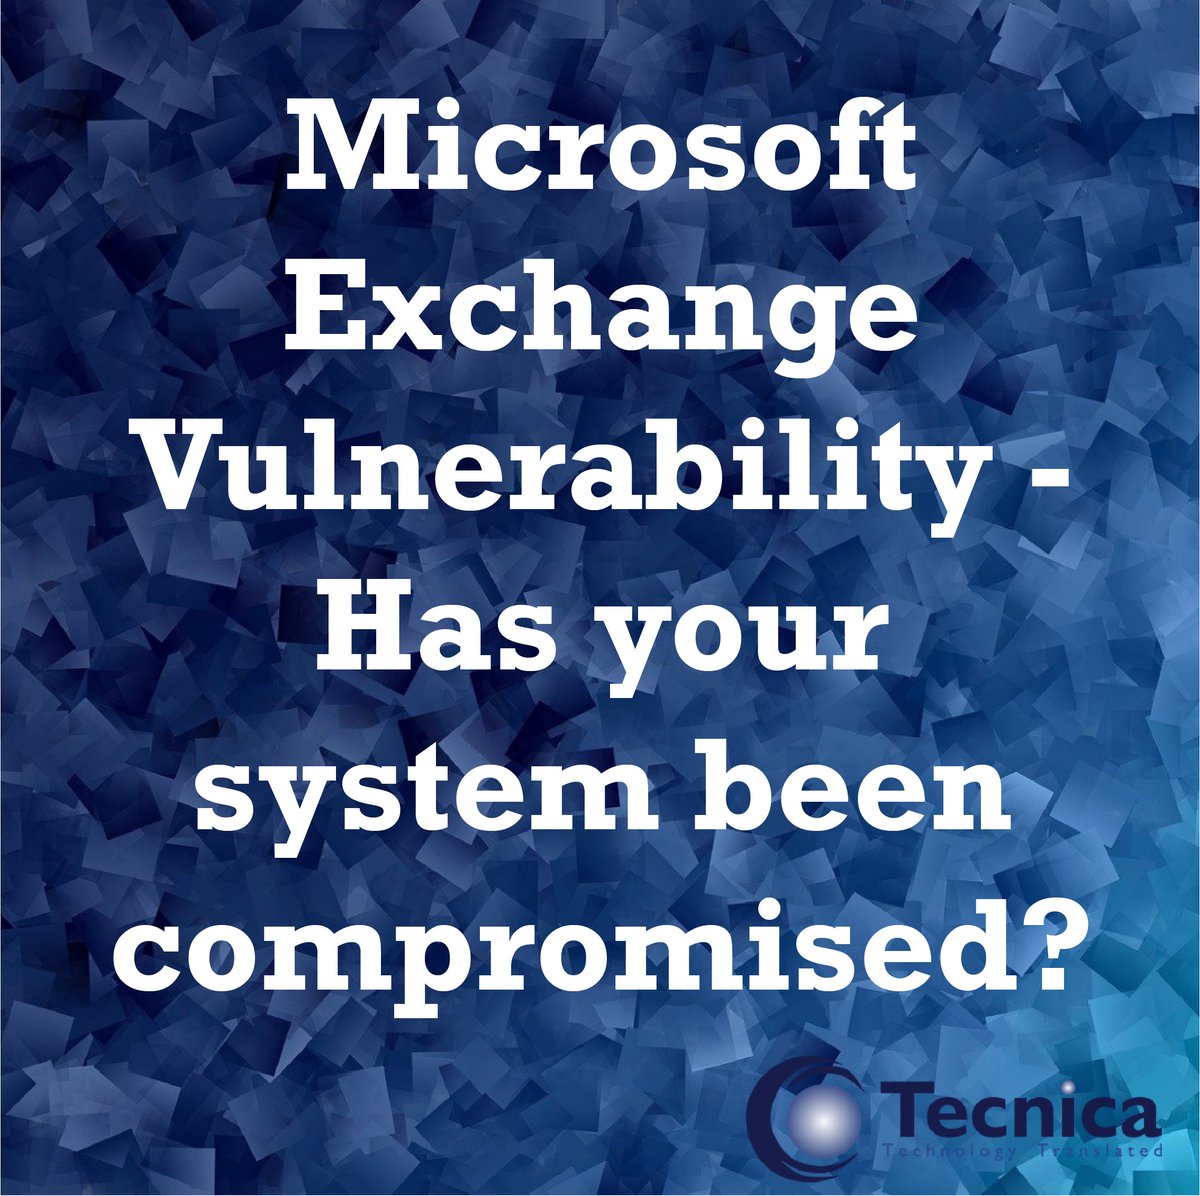 Microsoft unpatched on-premises Exchange Servers are at risk from multiple attacks!
Find Out More: bit.ly/3tnCnUg
#Microsoft #ExchangeServer #Ransomware #CyberAttacks #CyberSecurity #ITSecurity